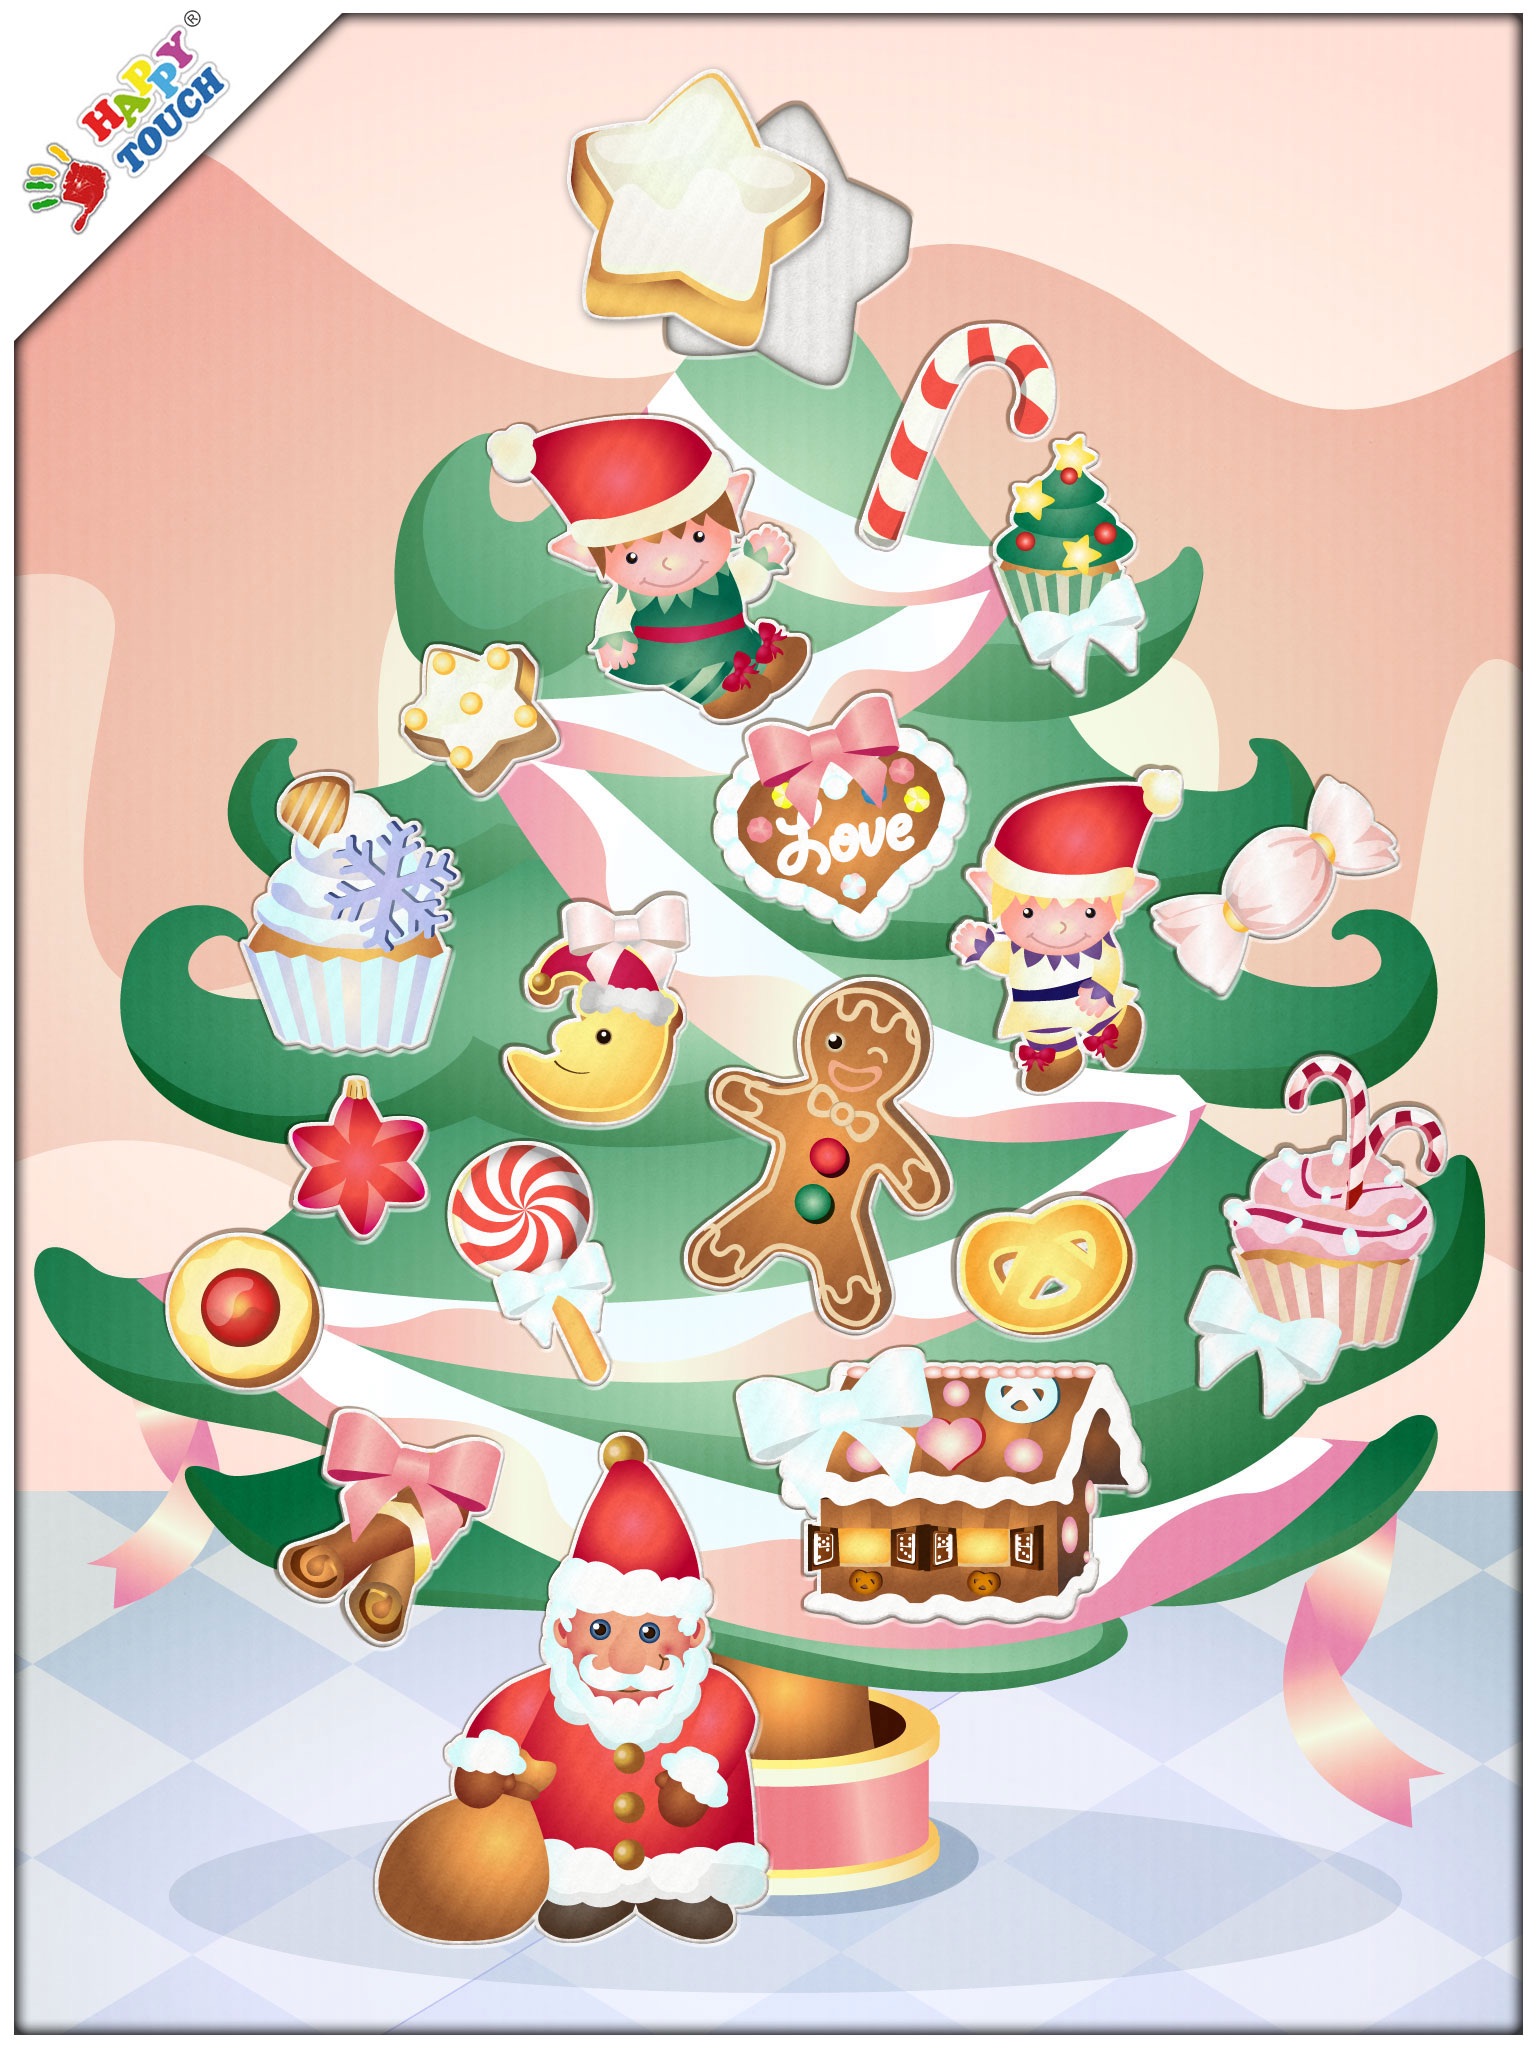 Christmas Tree Decorating for kids (by Happy Touch) screenshot 2